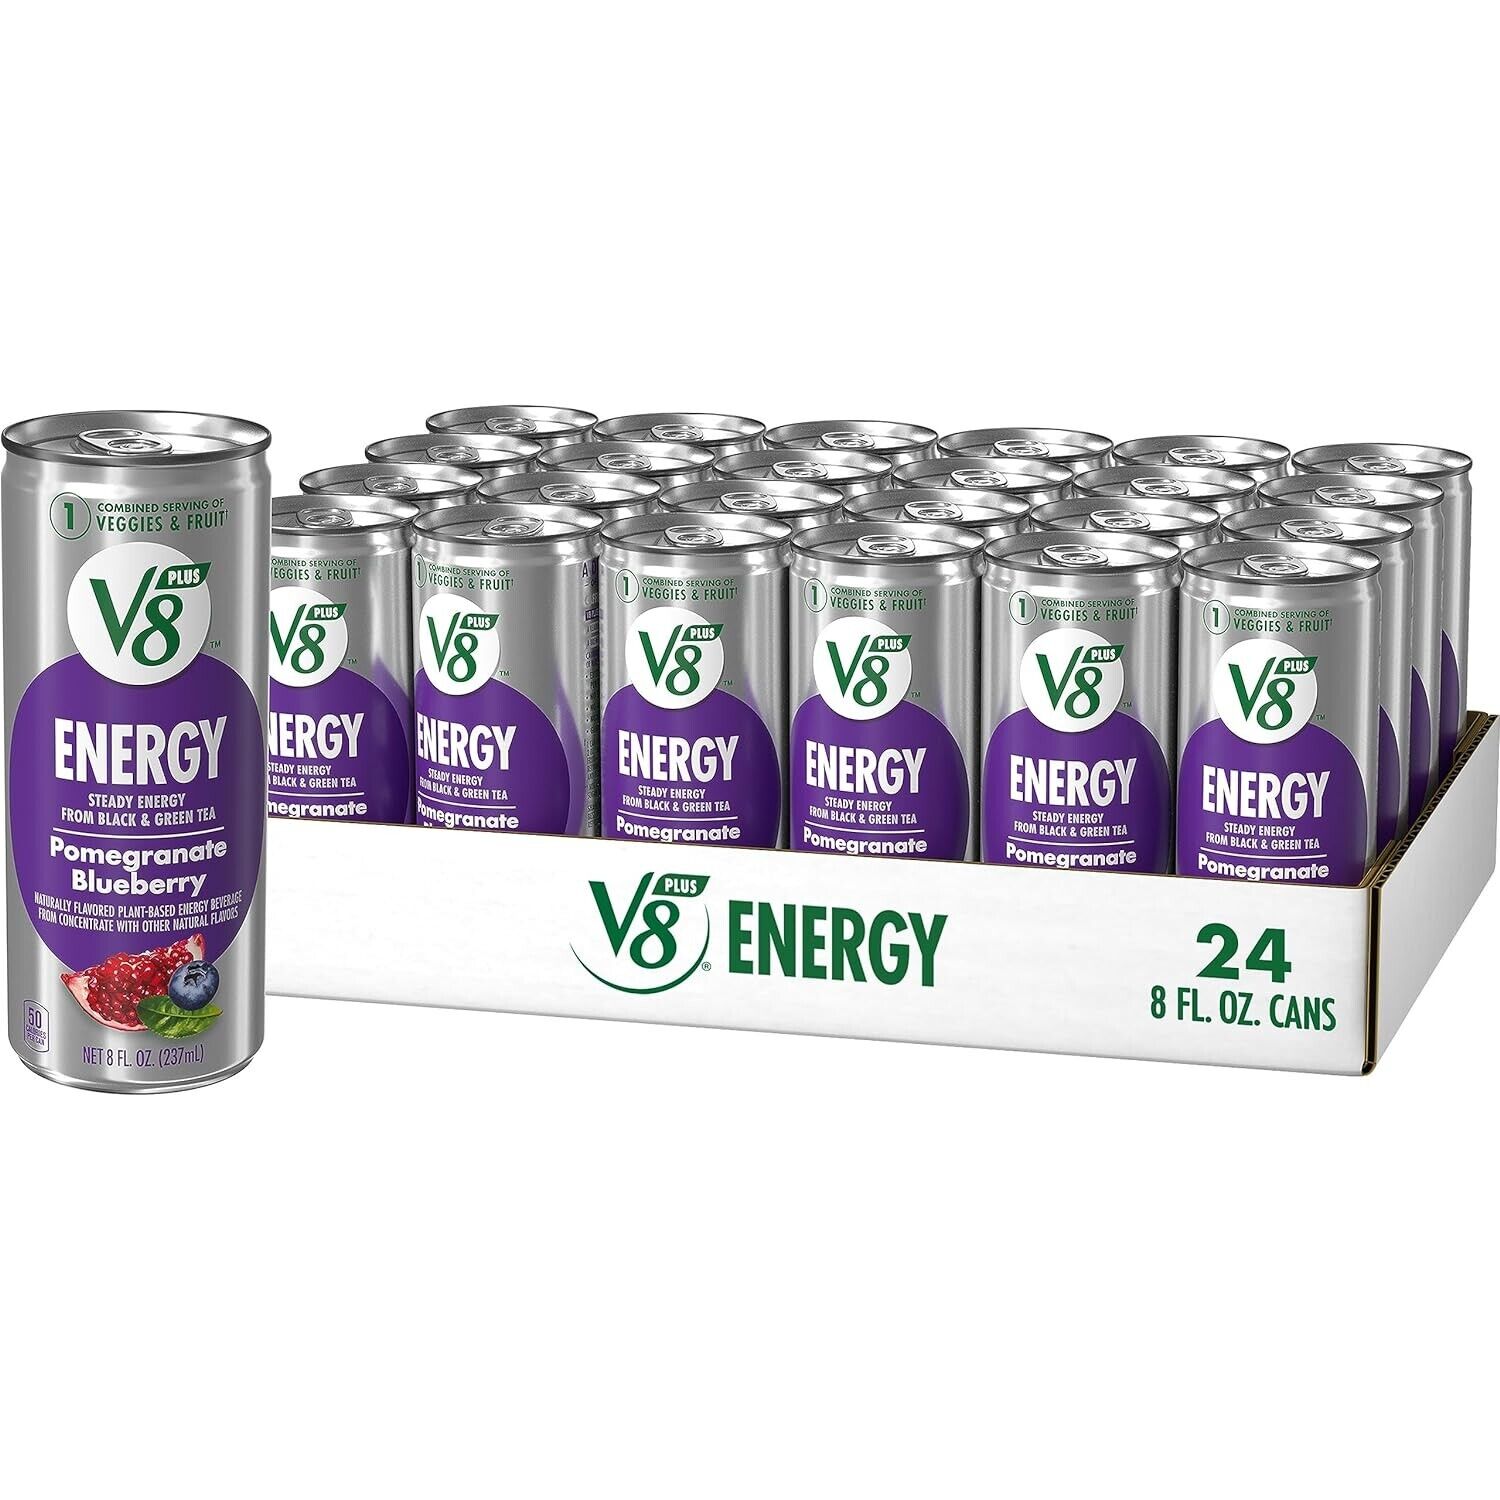 V8 +ENERGY Pomegranate Blueberry Energy Drink Made With Real Vegetable And Fruit